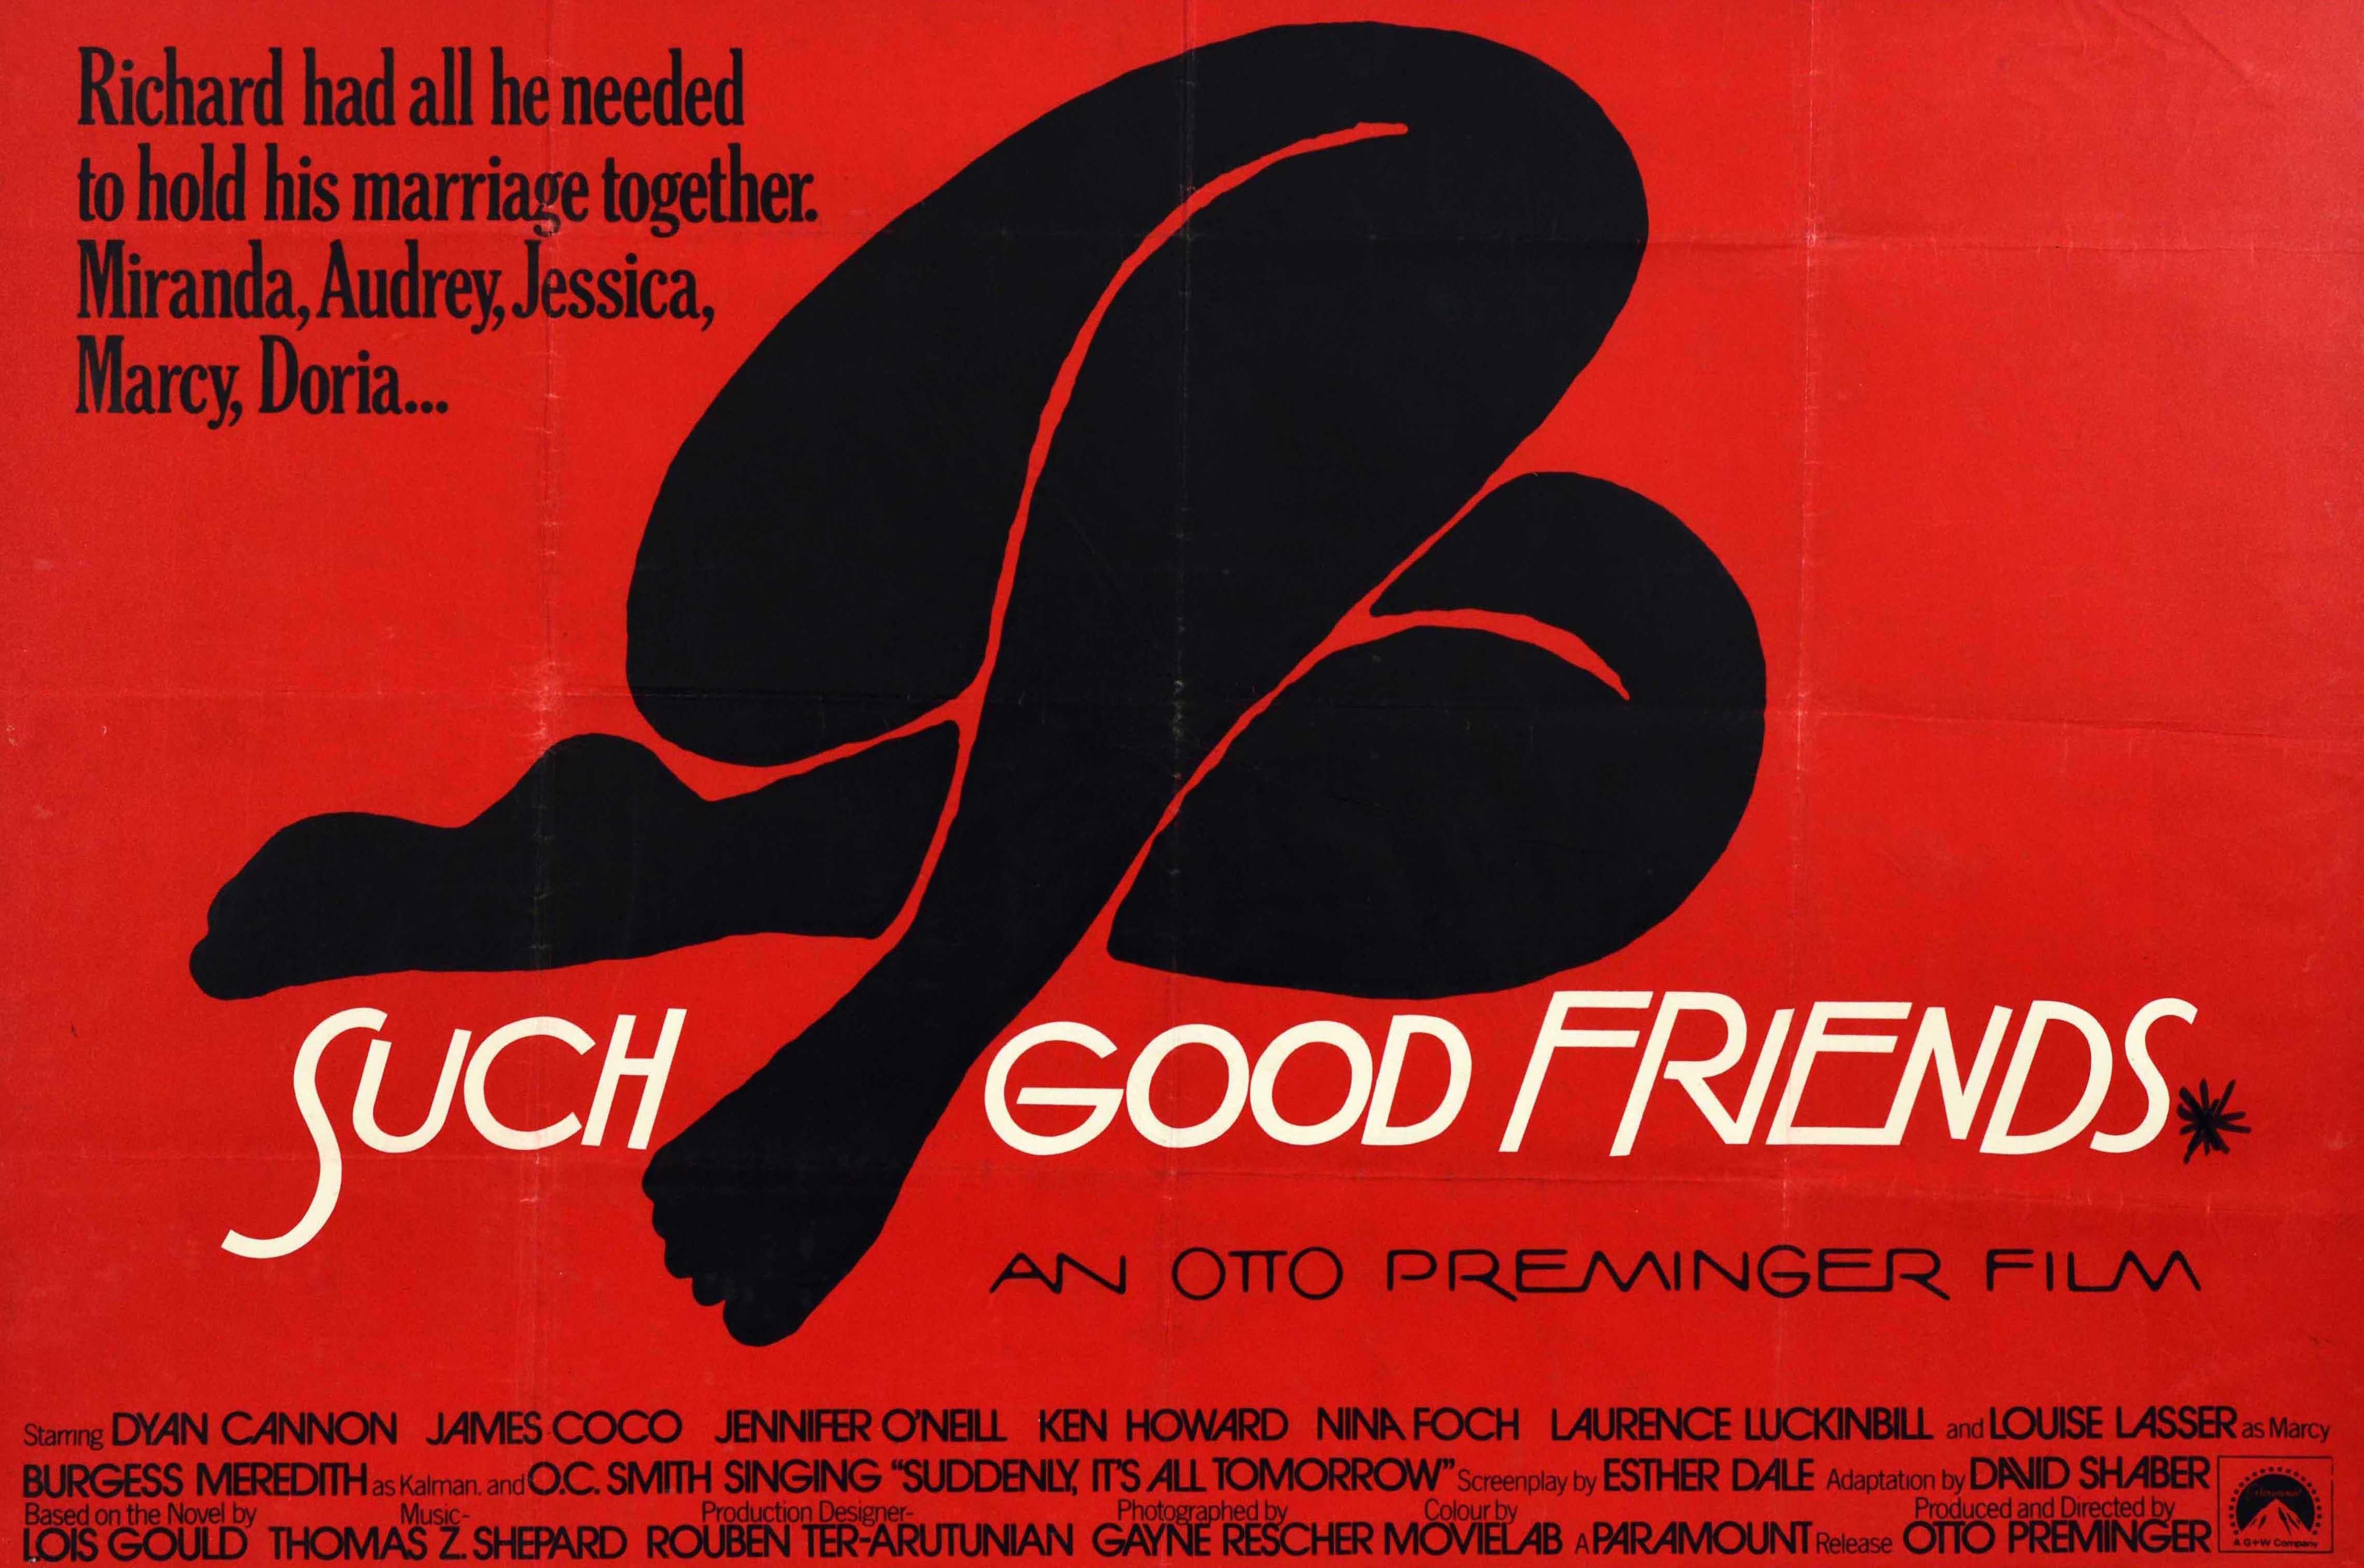 Original vintage movie poster for the UK release of the drama comedy film Such Good Friends directed by Otto Preminger and starring Dyan Cannon, James Coco and Jennifer O'Neill, based on a novel by Louis Gould. Stunning design by the notable